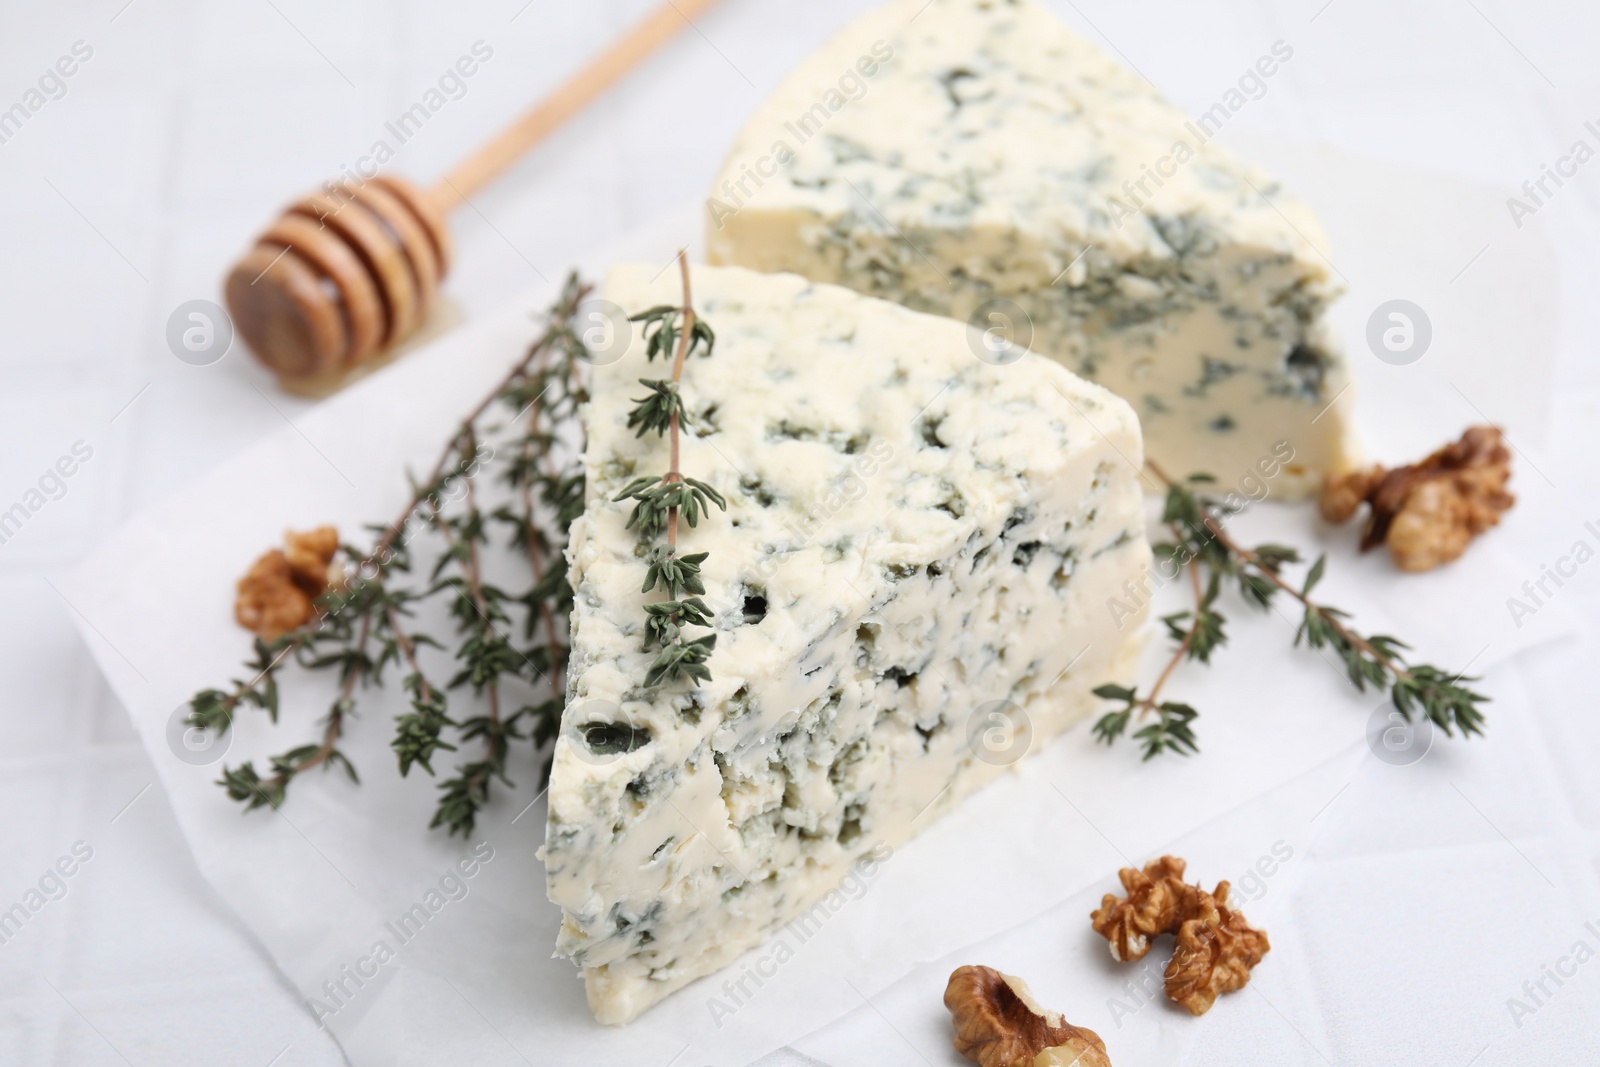 Photo of Tasty blue cheese with thyme, walnuts and honey dipper on white table, closeup